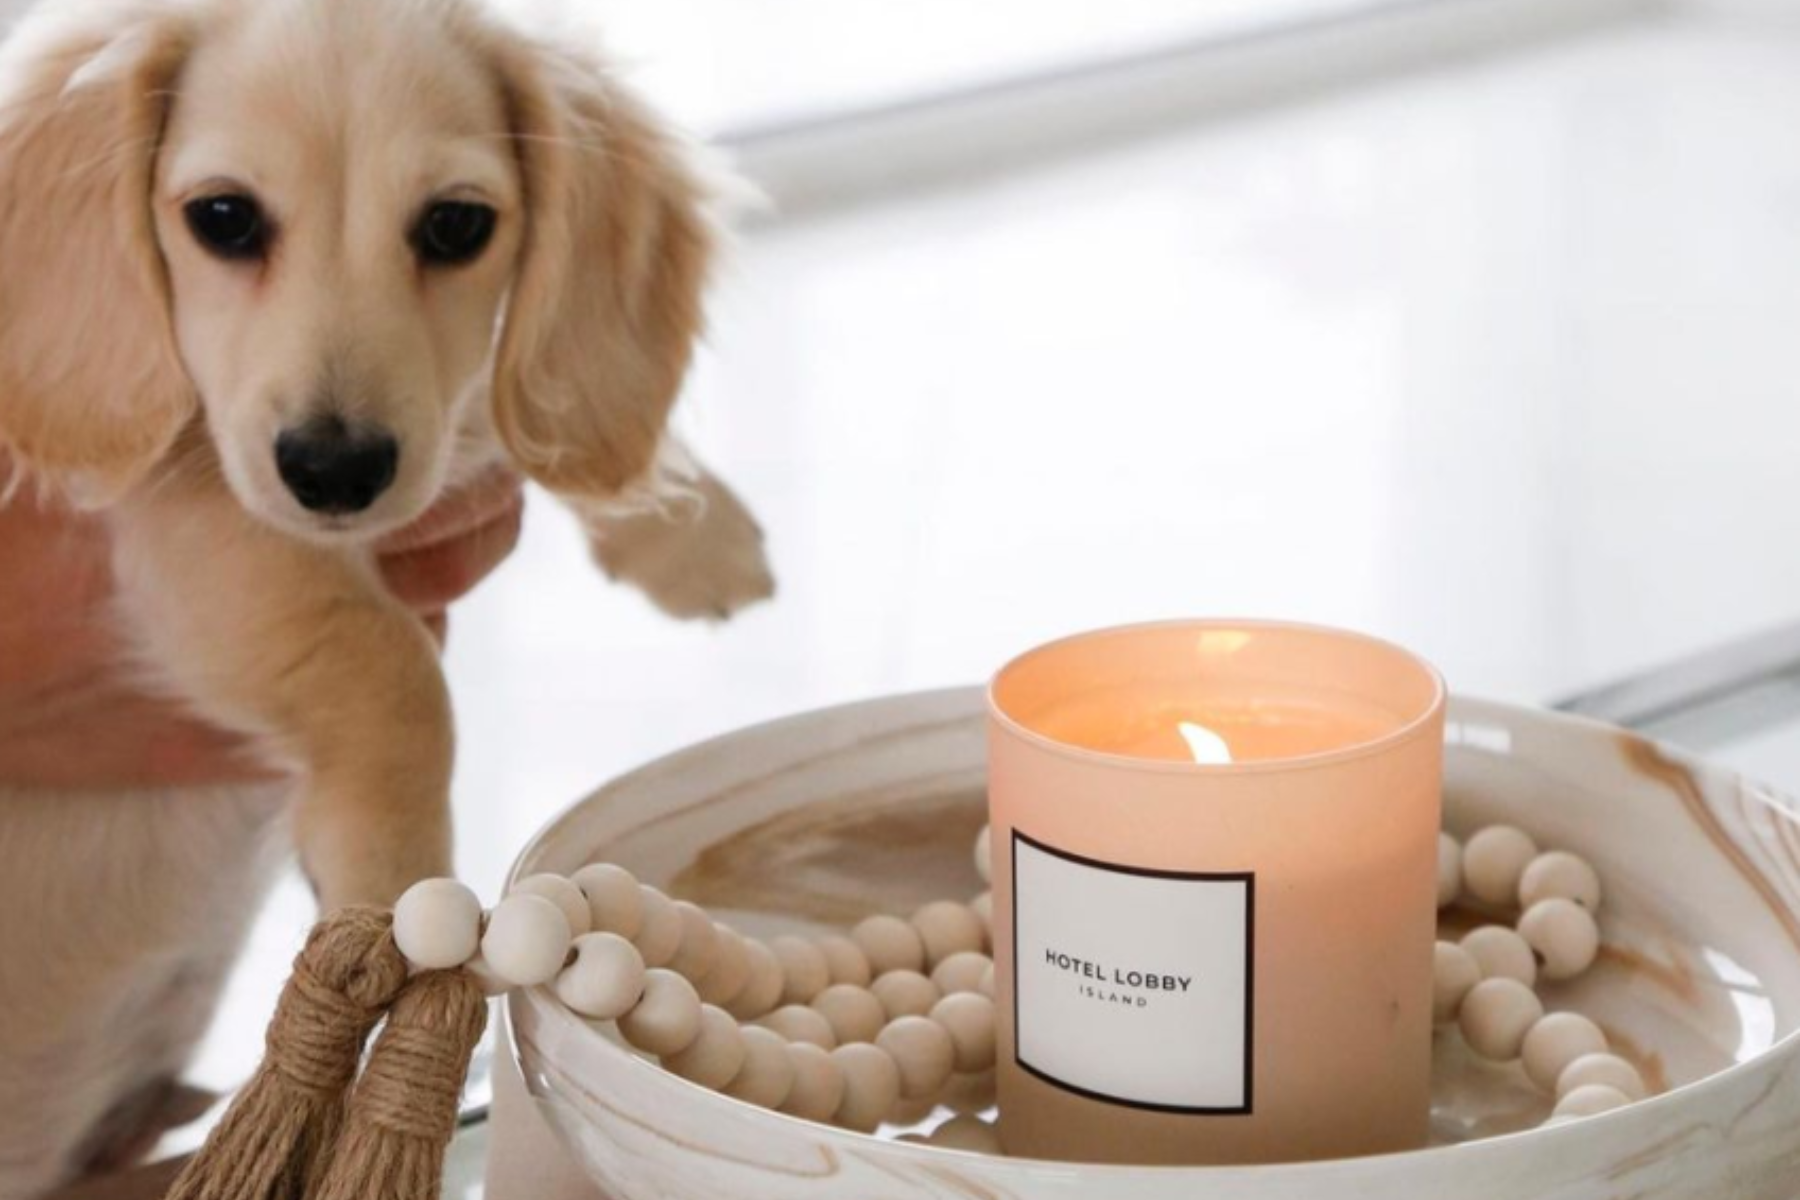 Are Candles Bad for Dogs?